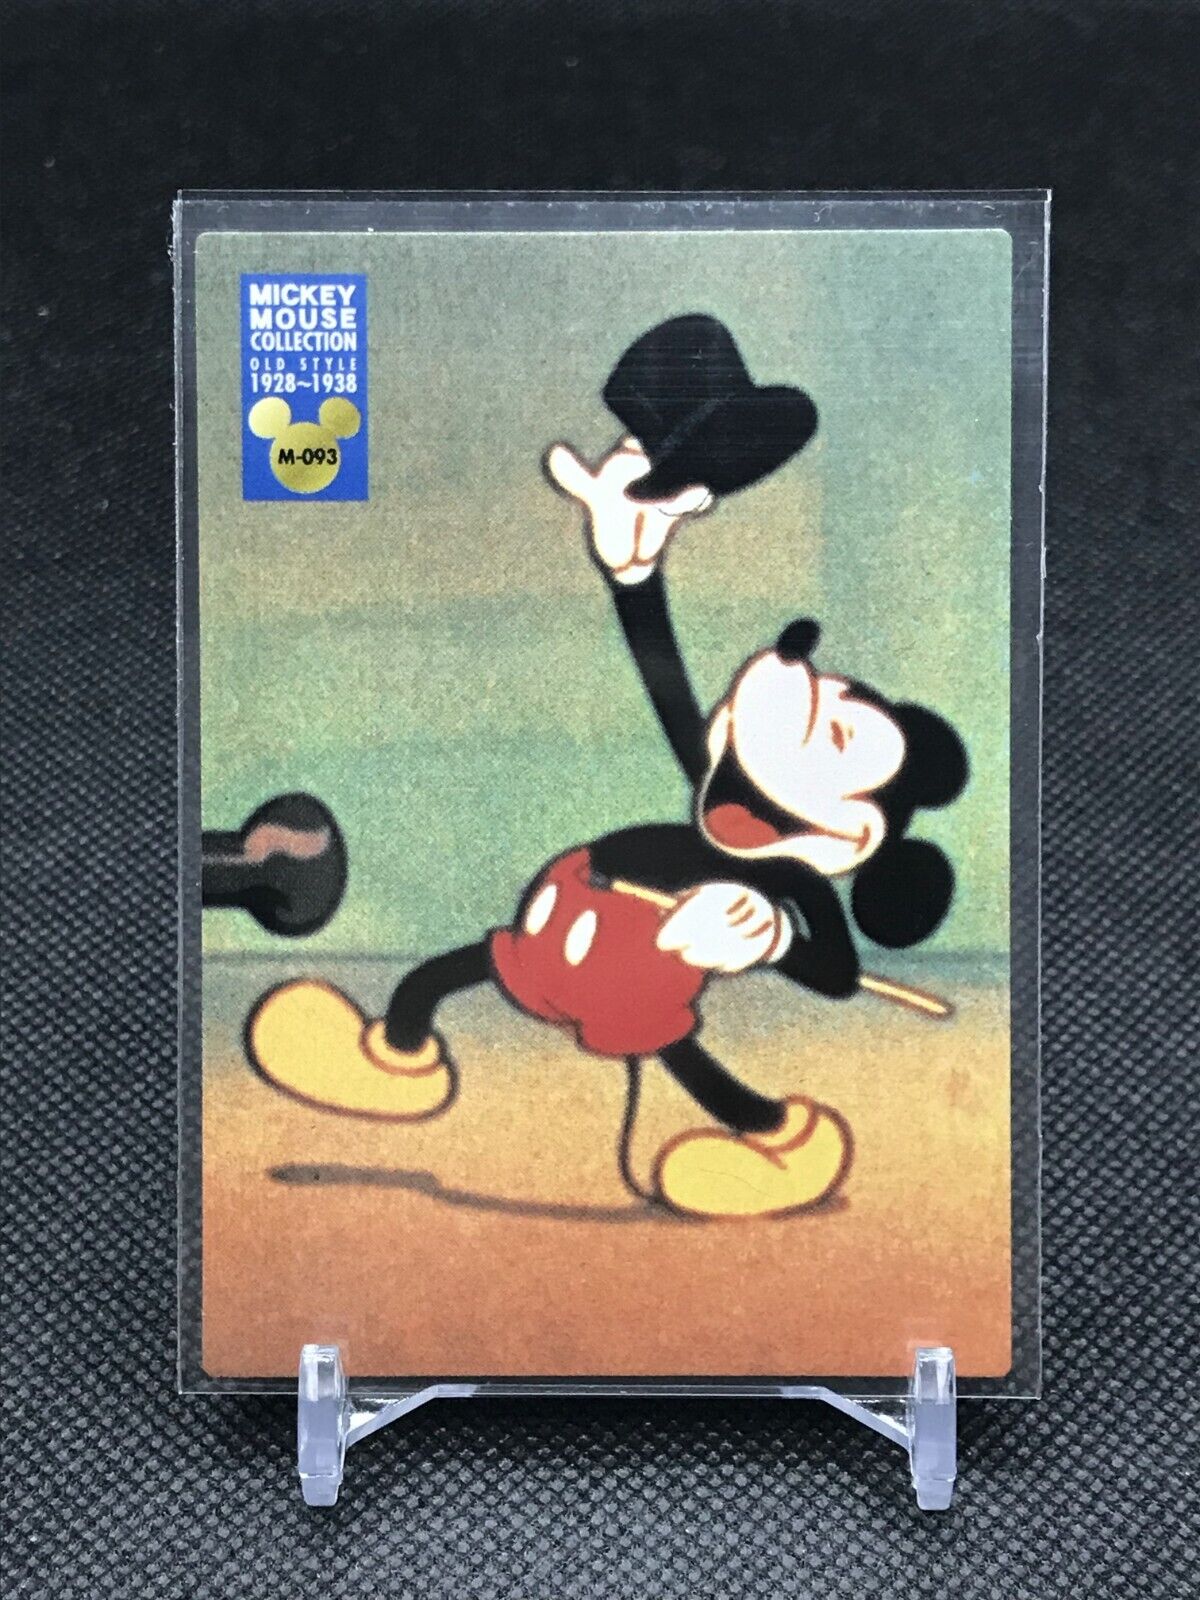 M-093 MICKEY MOUSE COLLECTION OLD STYLE 1928~1938 Made in JAPAN 1999